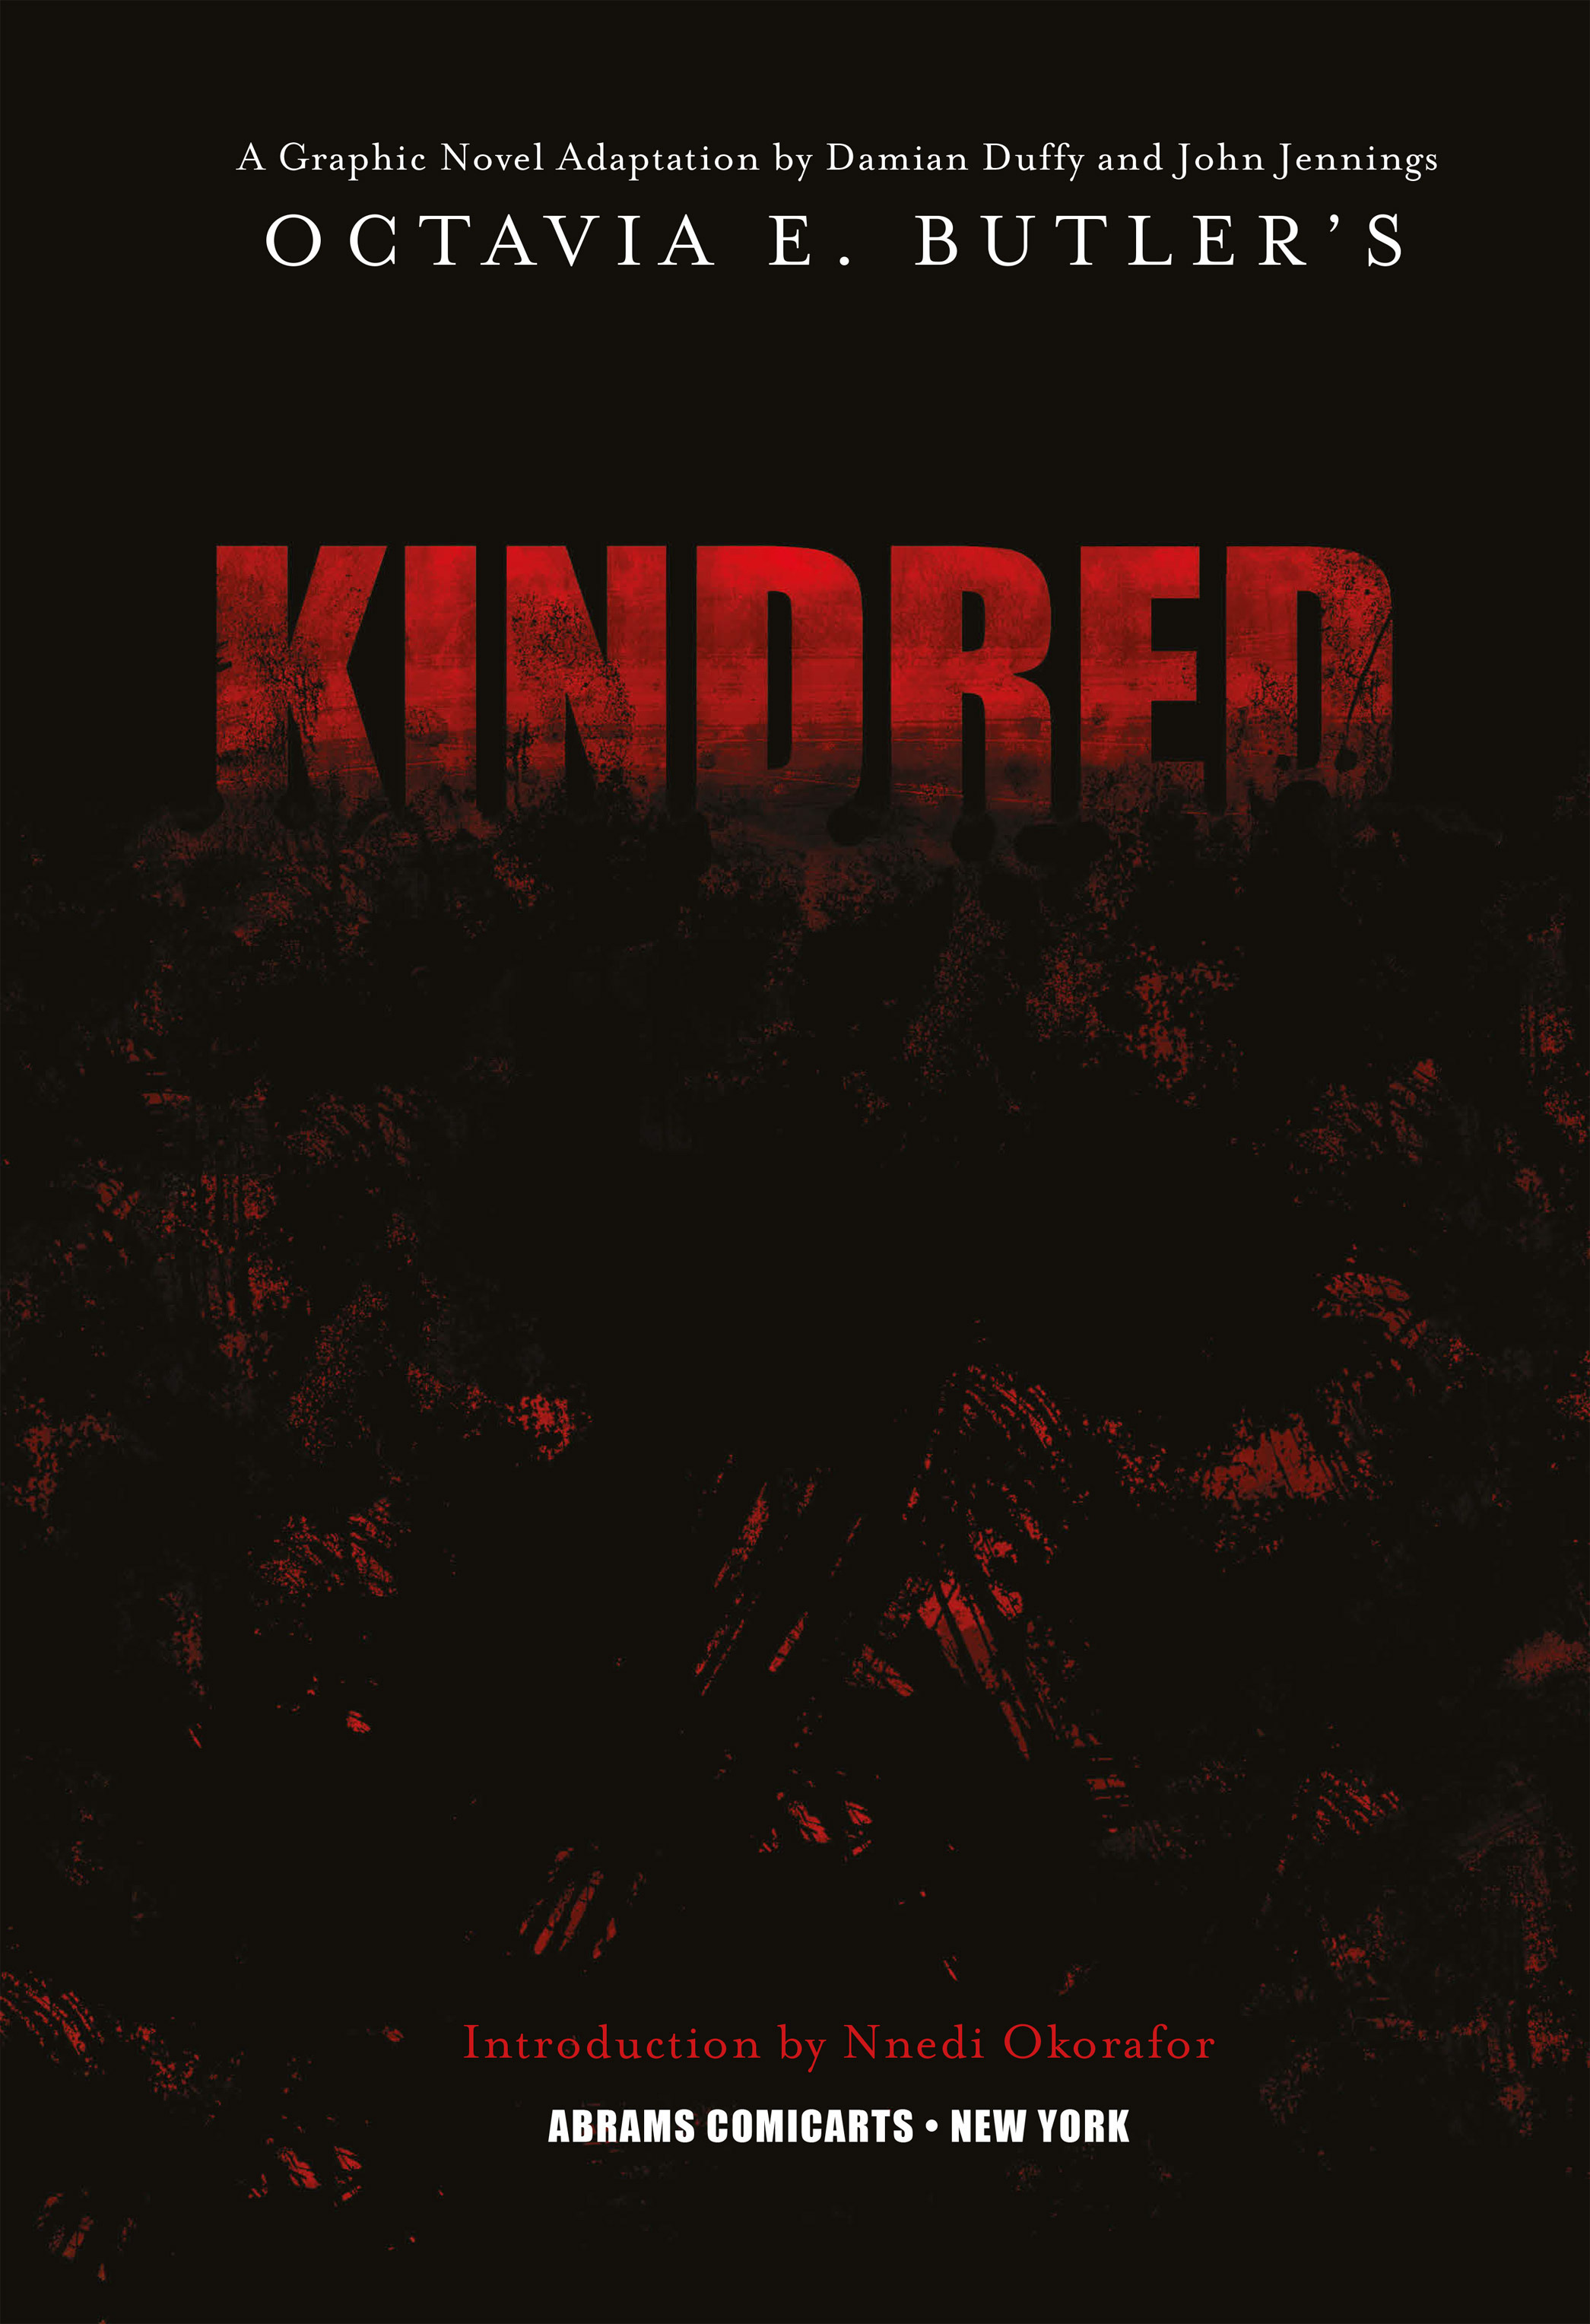 Read online Kindred: A Graphic Novel Adaptation comic -  Issue # TPB (Part 1) - 3